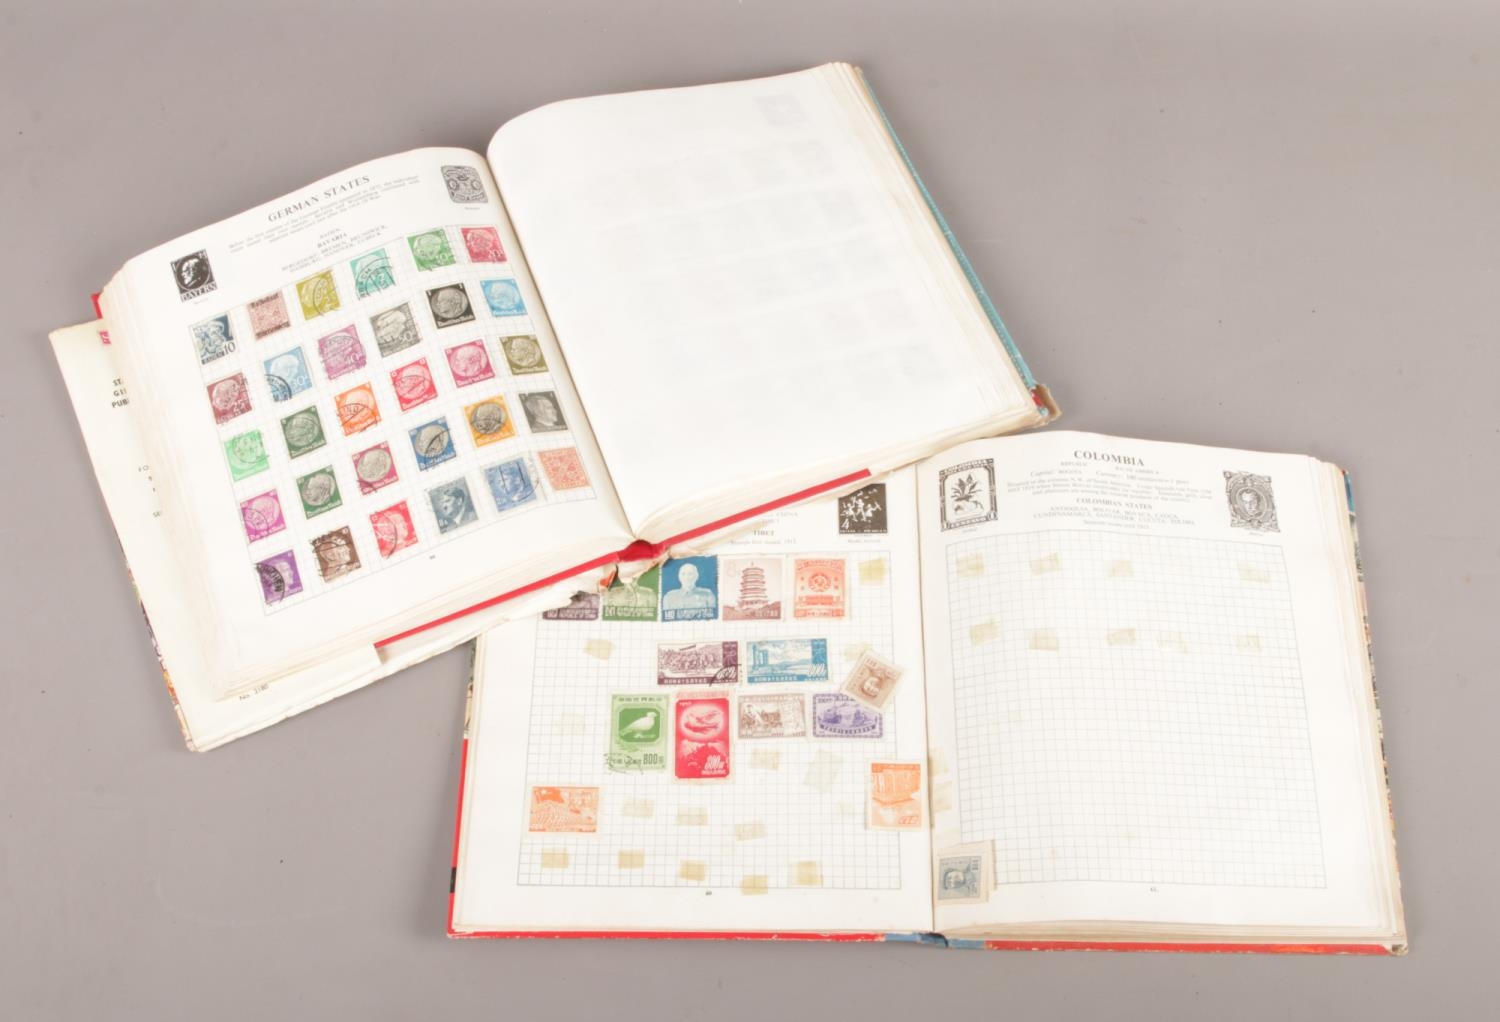 Two Stanley Gibbons stamp albums with contents of world stamps. - Image 2 of 2